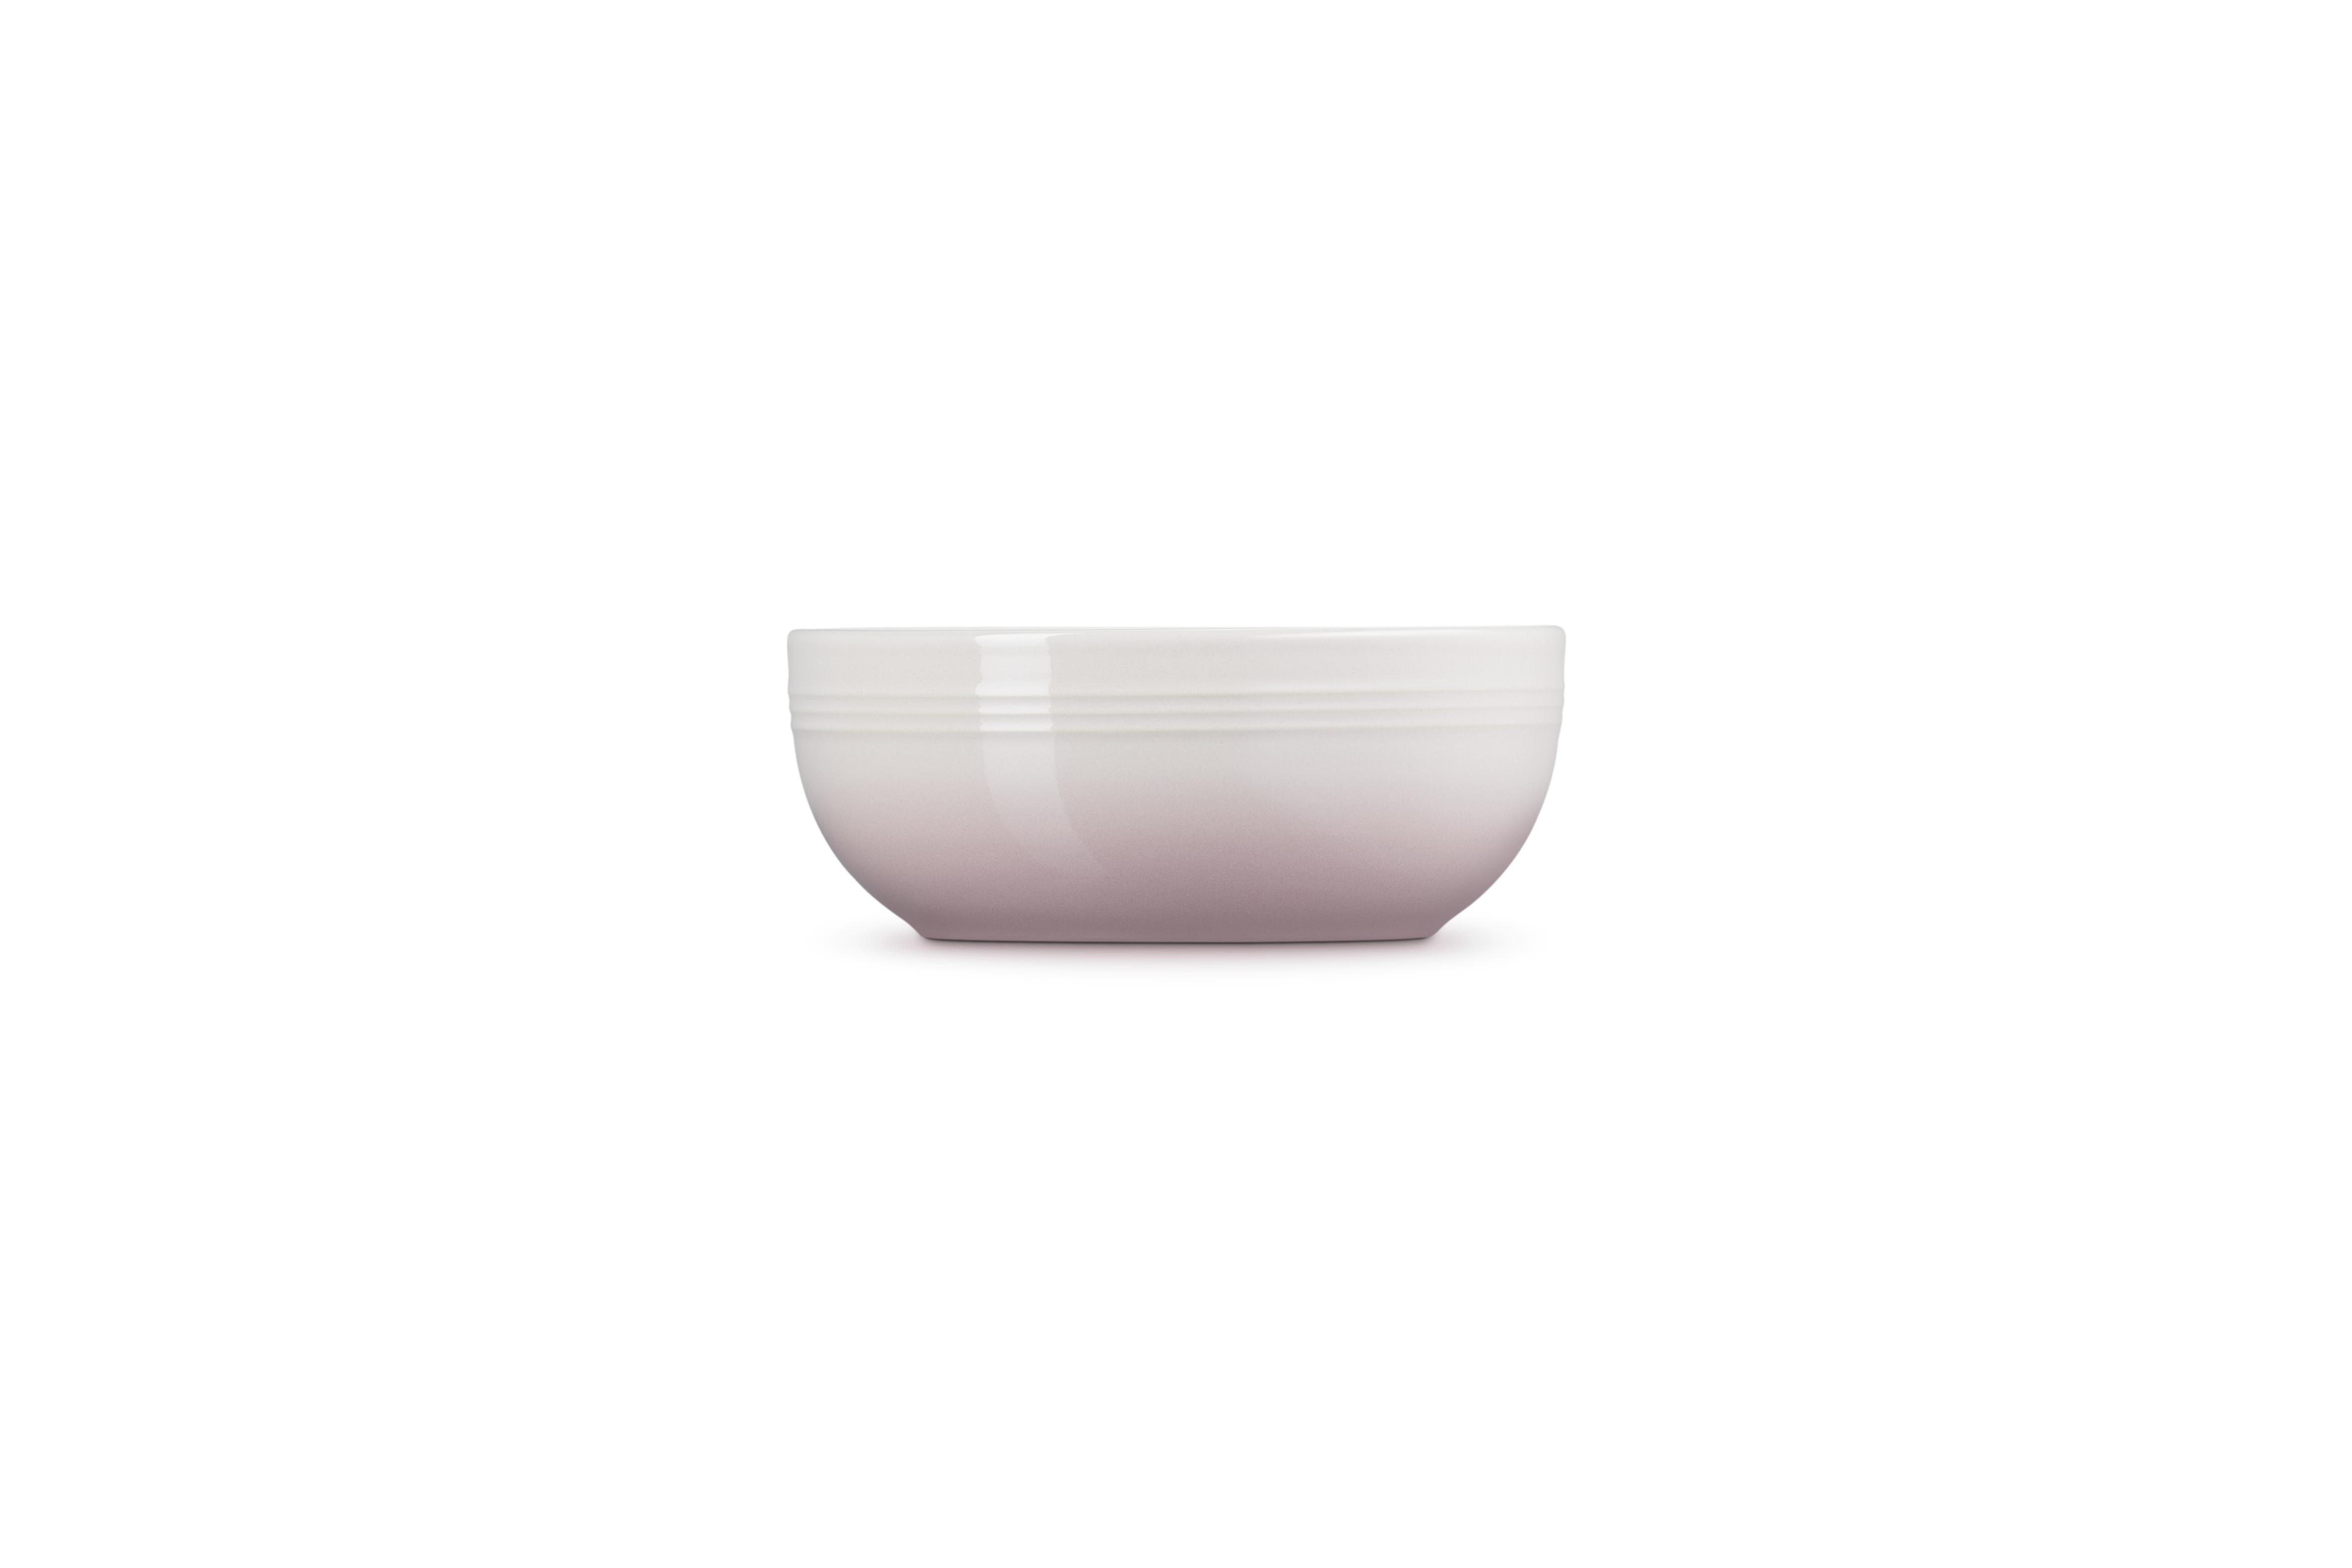 Le Creuset Coupe Cereal Bowl, Shell Pink